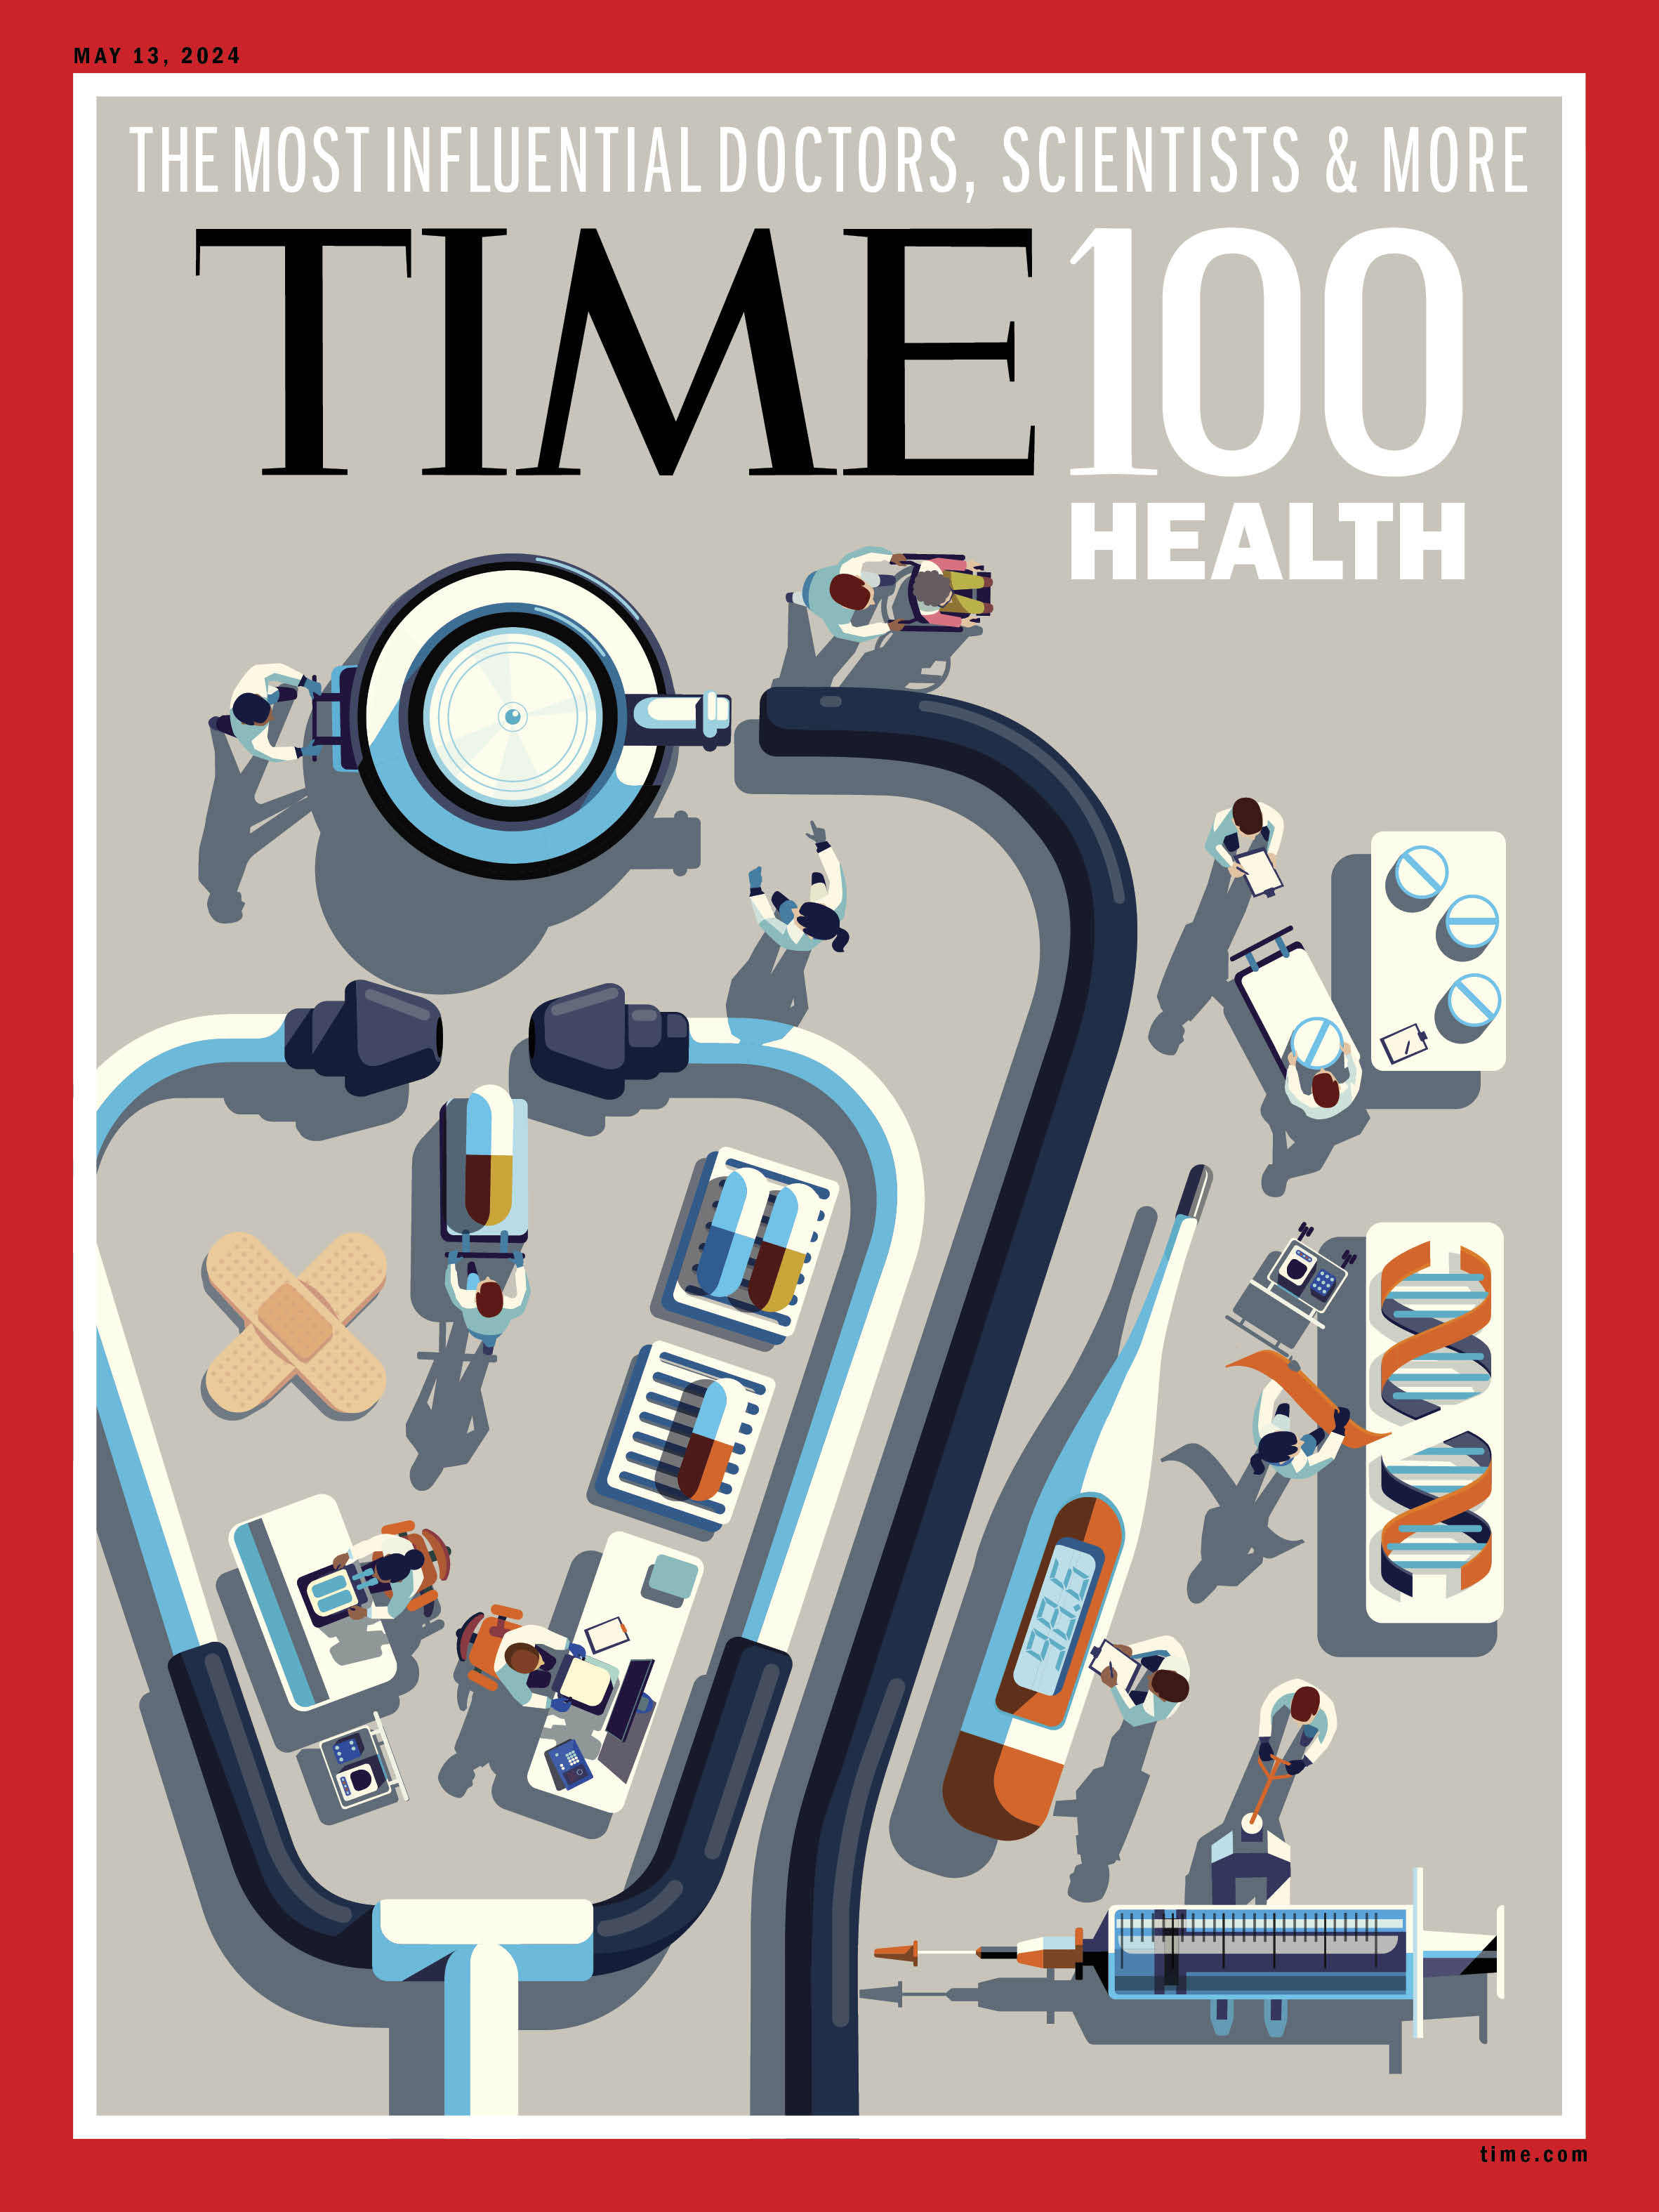 TIME 100 Health Time Magazine cover